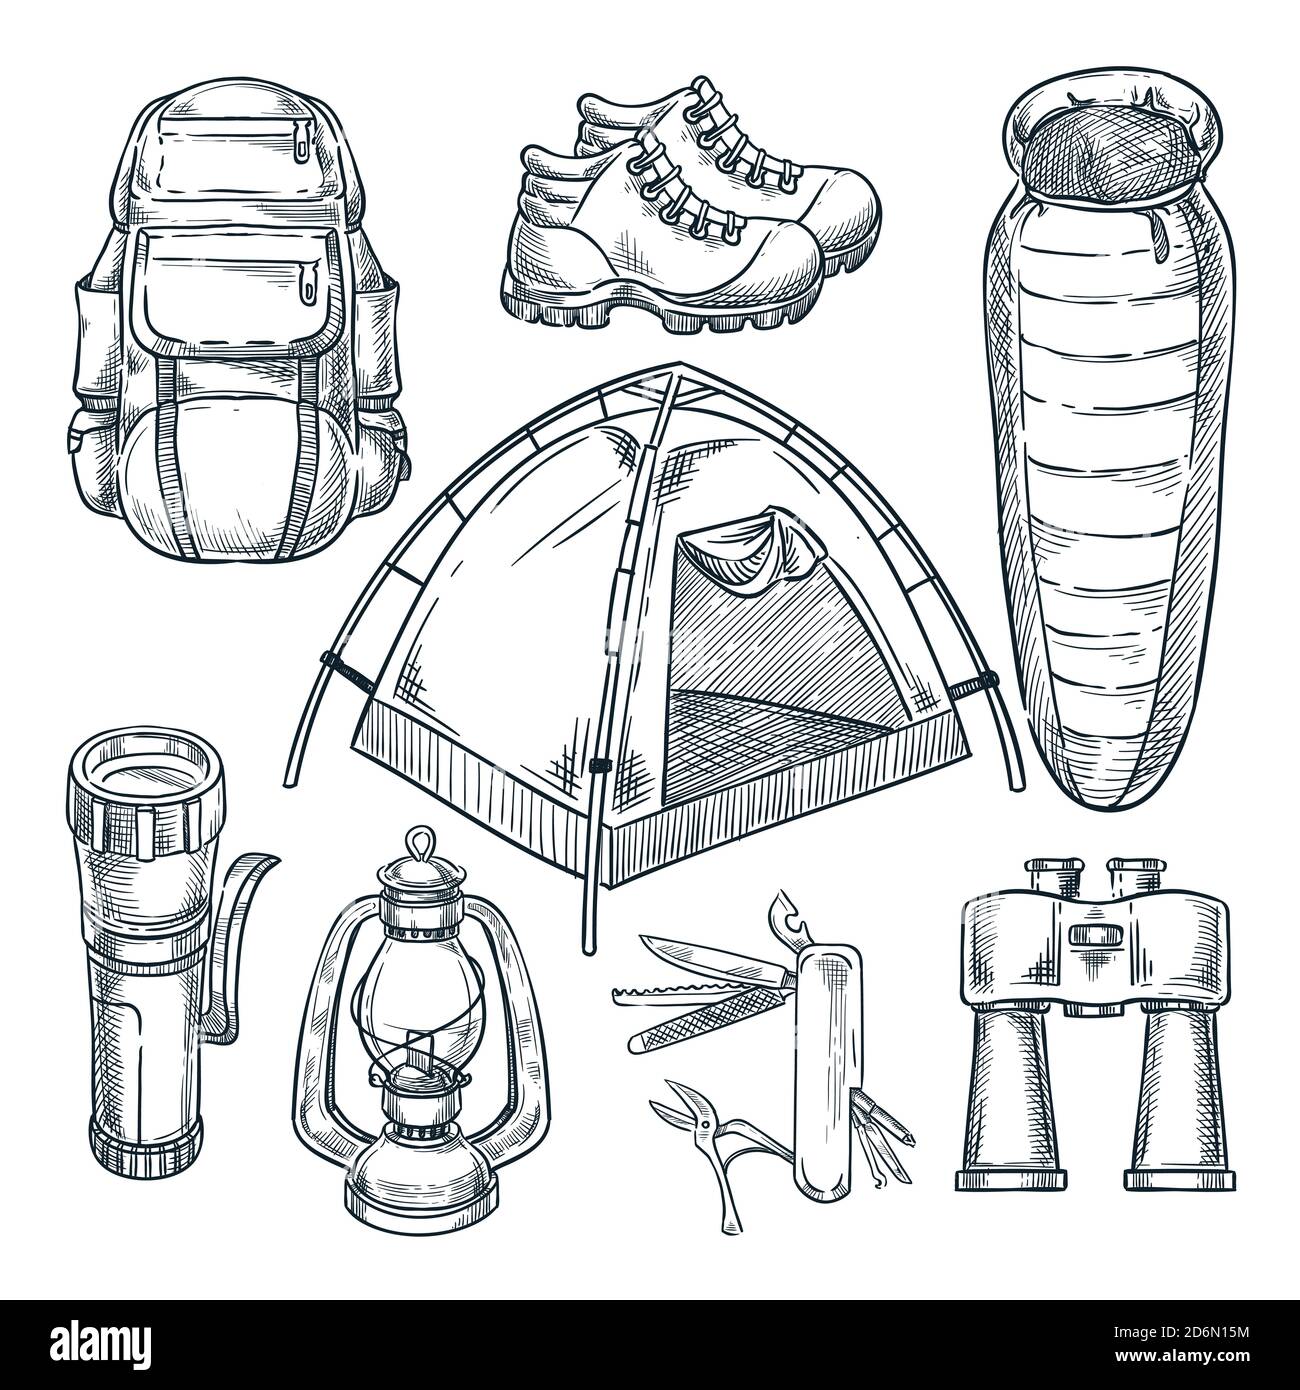 https://c8.alamy.com/comp/2D6N15M/camping-and-hike-items-set-vector-hand-drawn-sketch-illustration-camp-stuff-design-elements-isolated-on-white-background-2D6N15M.jpg